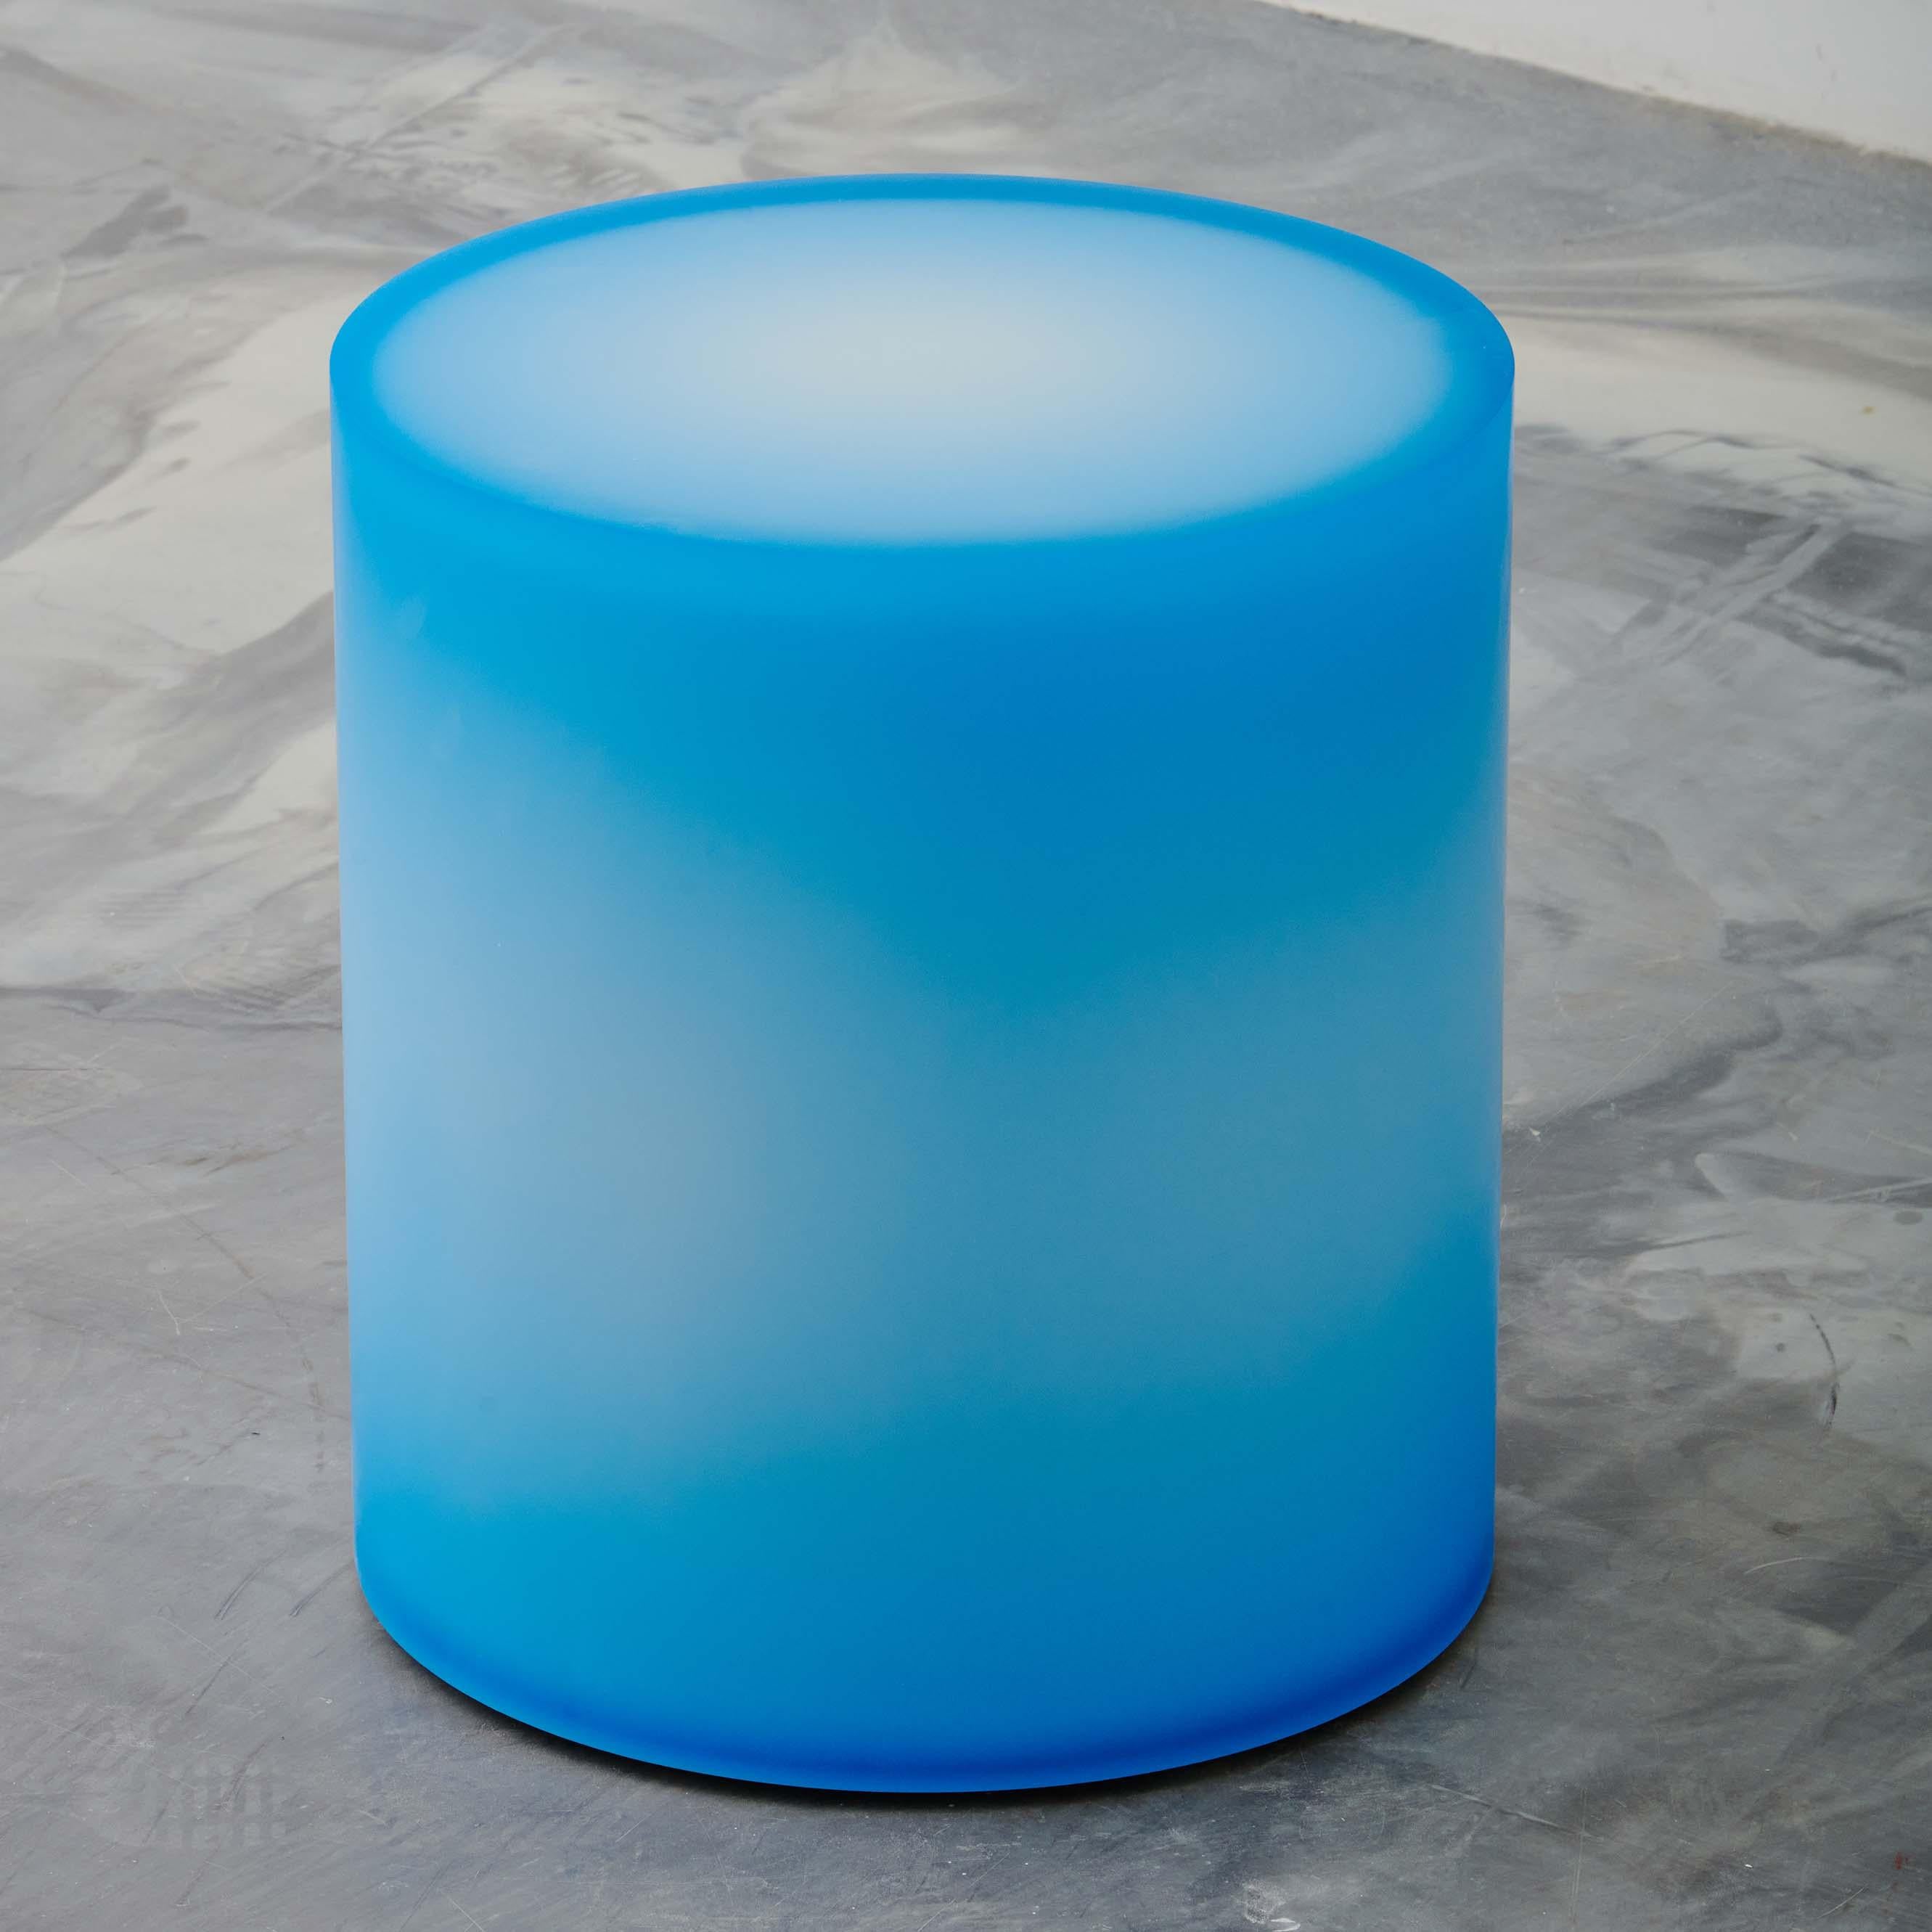 Multi-layer side table or stool features a shift core with a gradient of blues. The effects in this piece manage to both guide the eye, yet perplex it simultaneously.
Edition of 8 + 2AP.